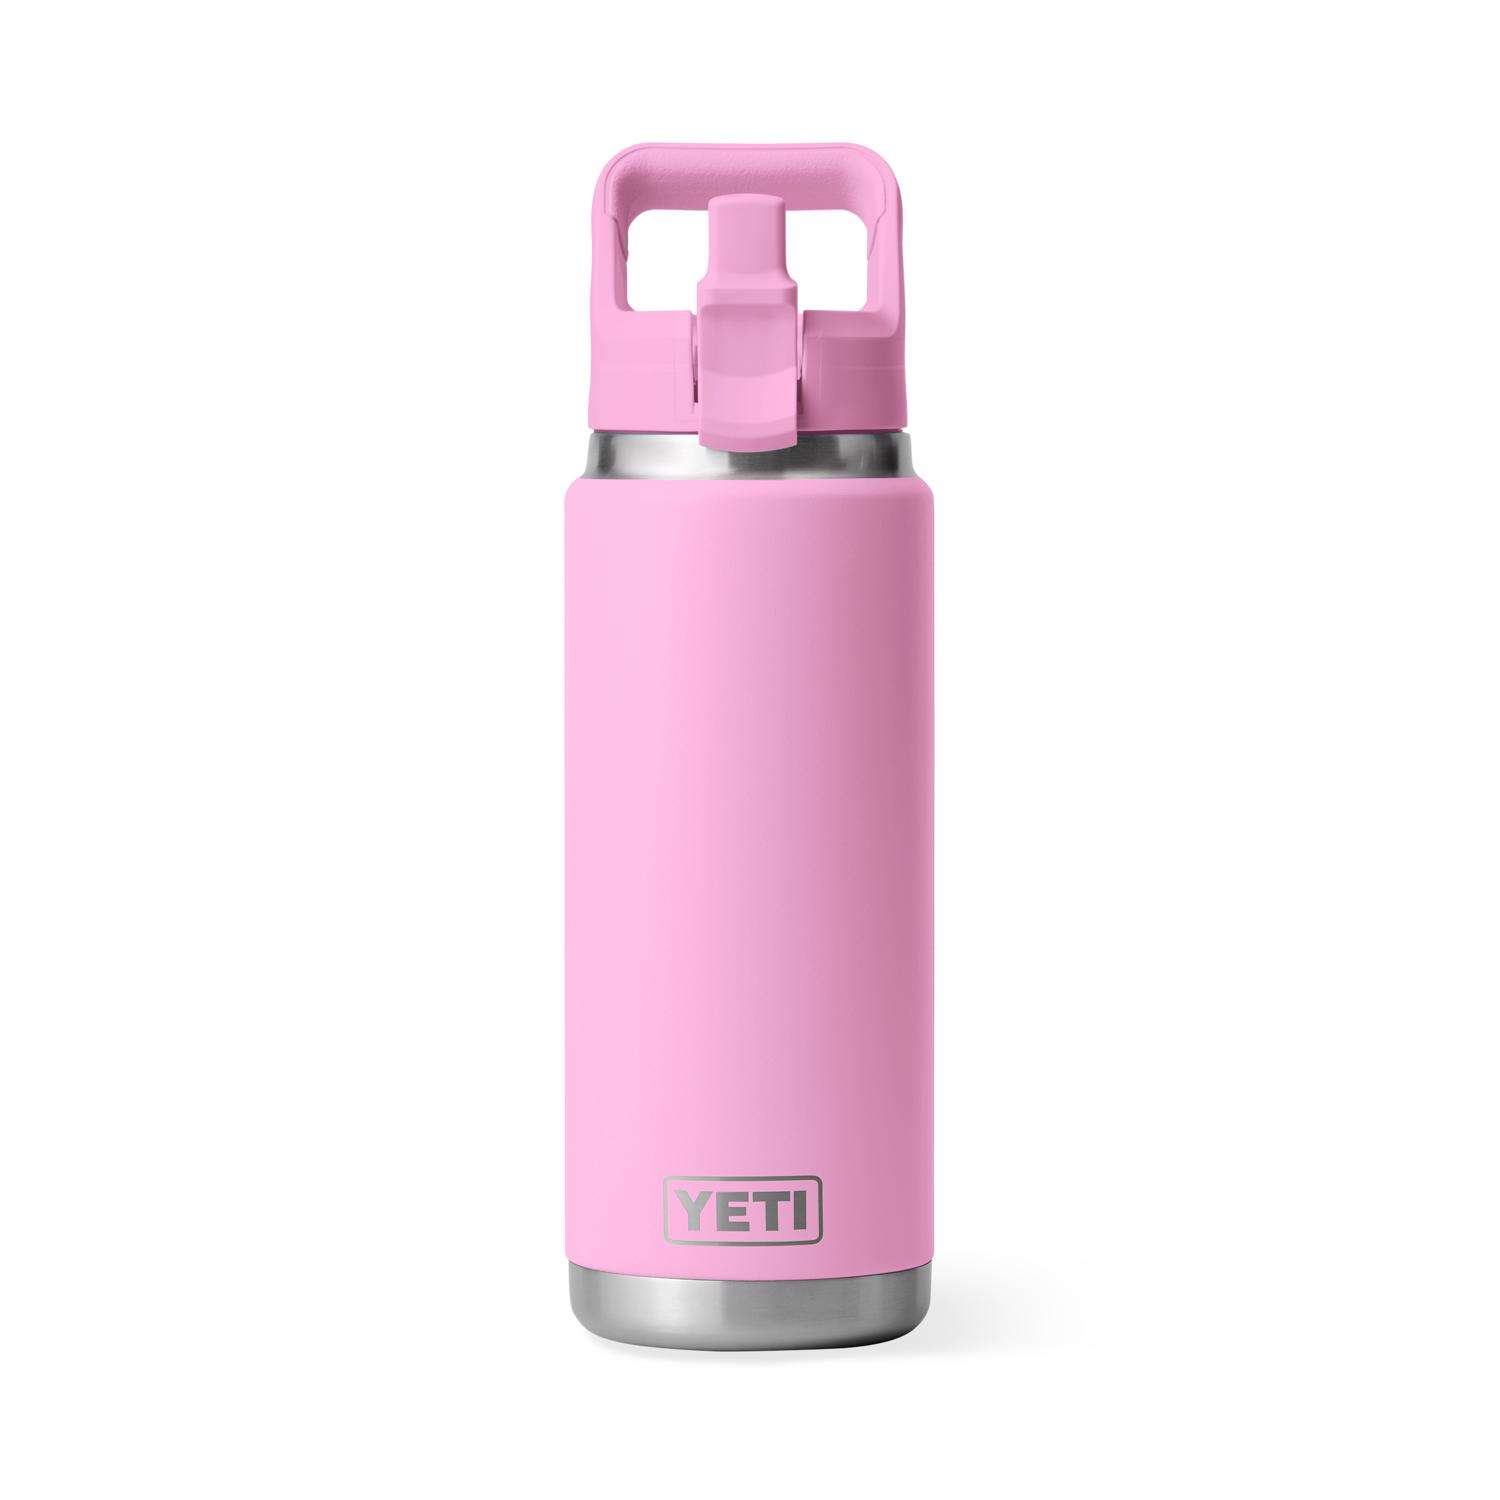 Steel Thermos 0,7L Pink Camo, Buy Steel Thermos 0,7L Pink Camo here